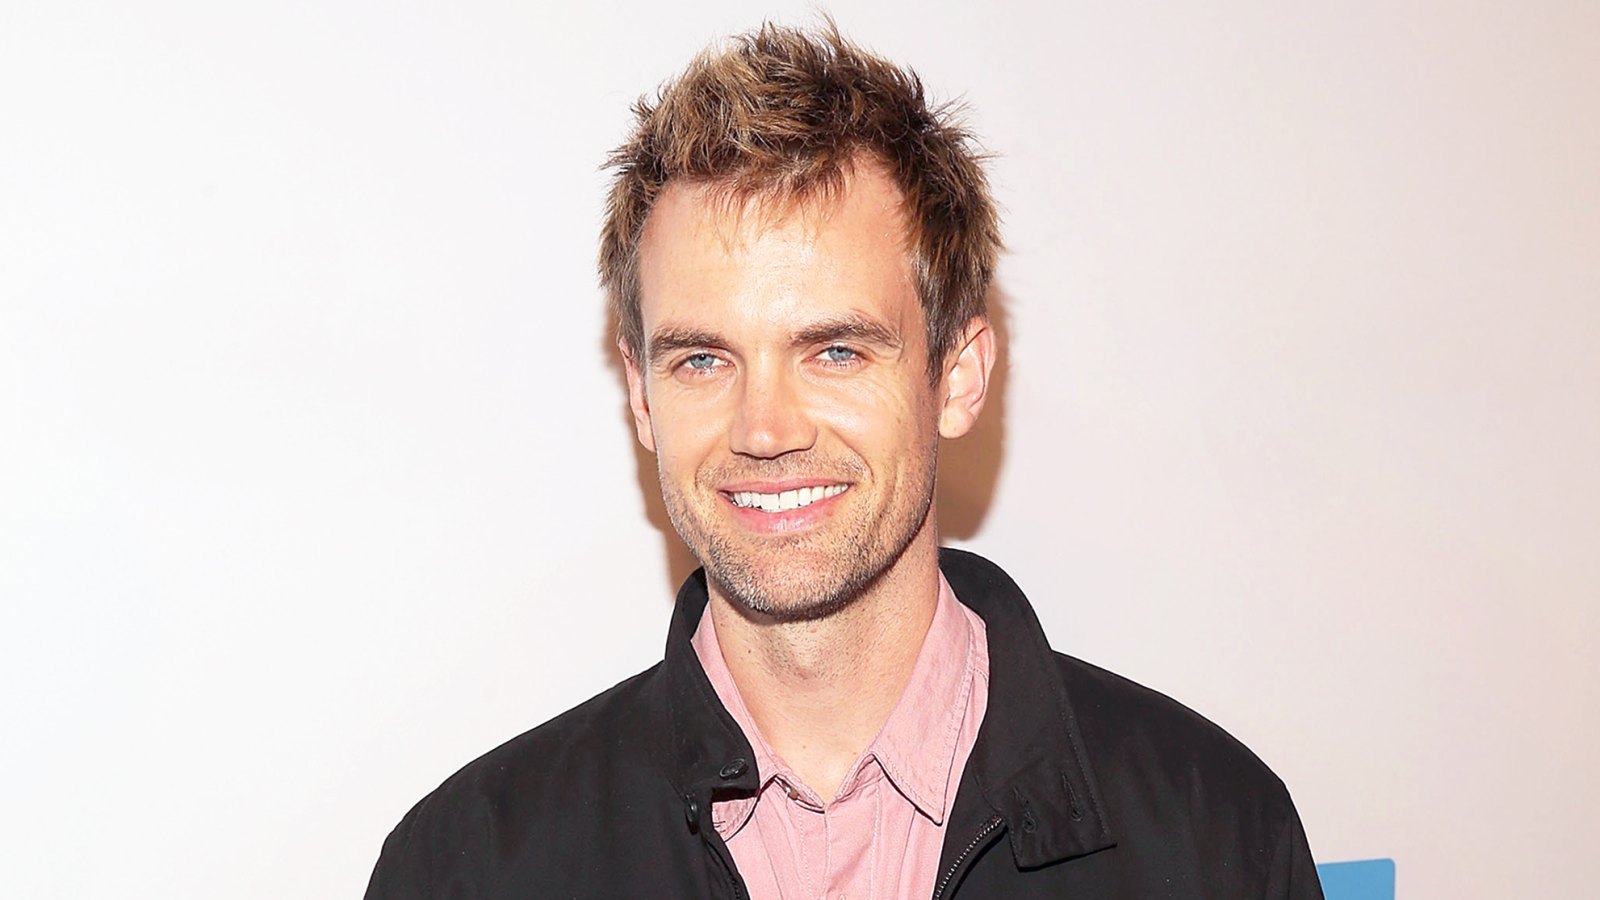 Tyler Hilton attends Party with a Purpose, the Official Pre-Party to WE Day California at The Peppermint Club on April 18, 2018 in Los Angeles, California.